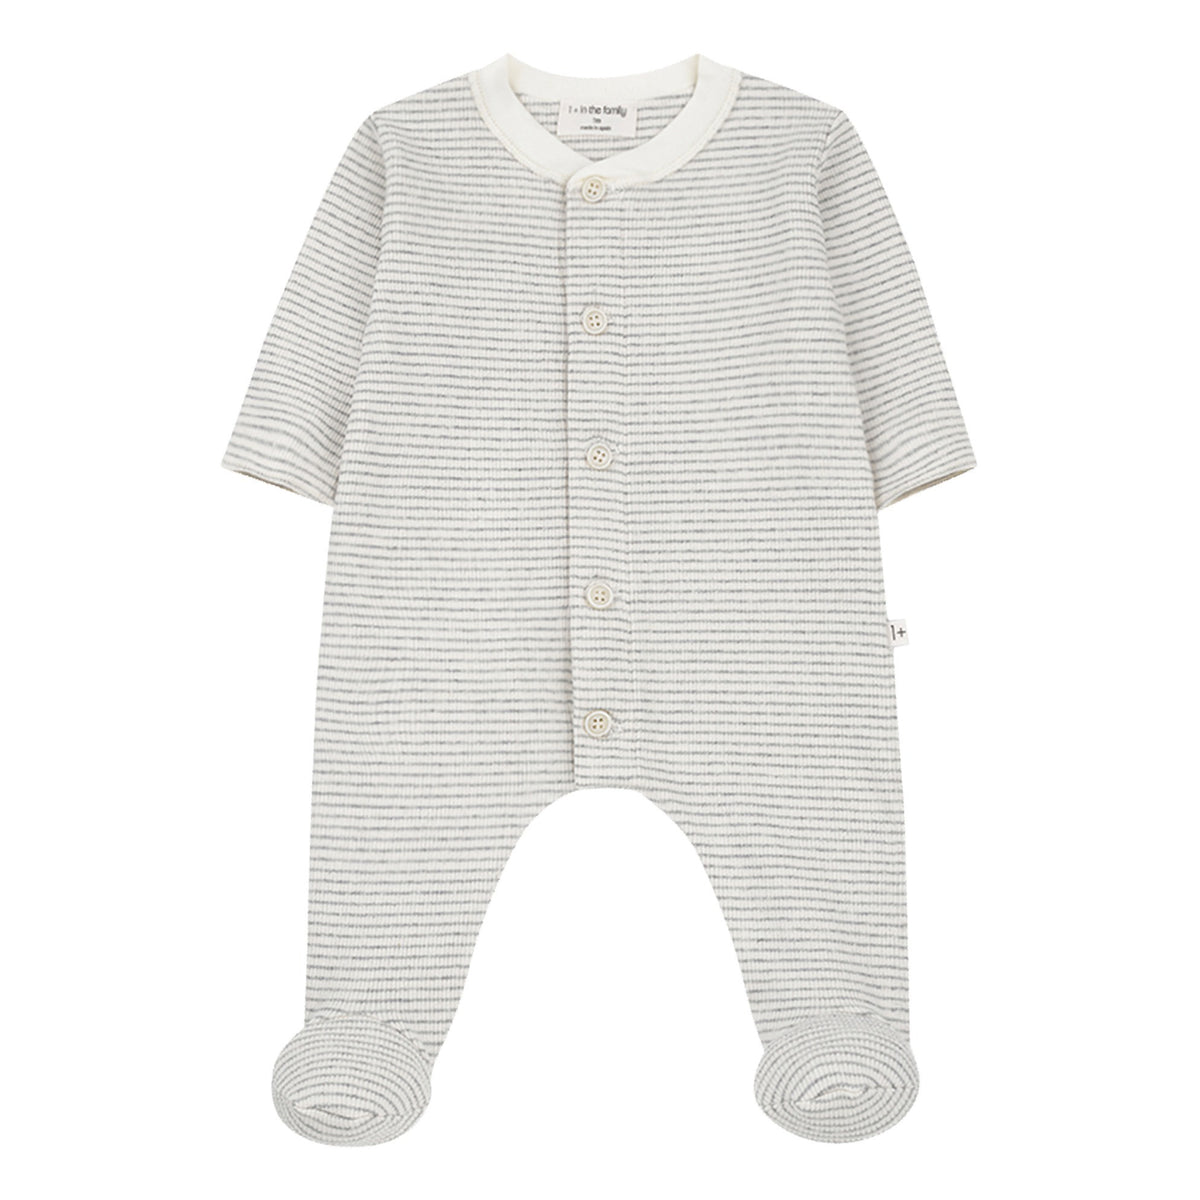 White and grey organic cotton long sleeved jump suit with feet for baby 